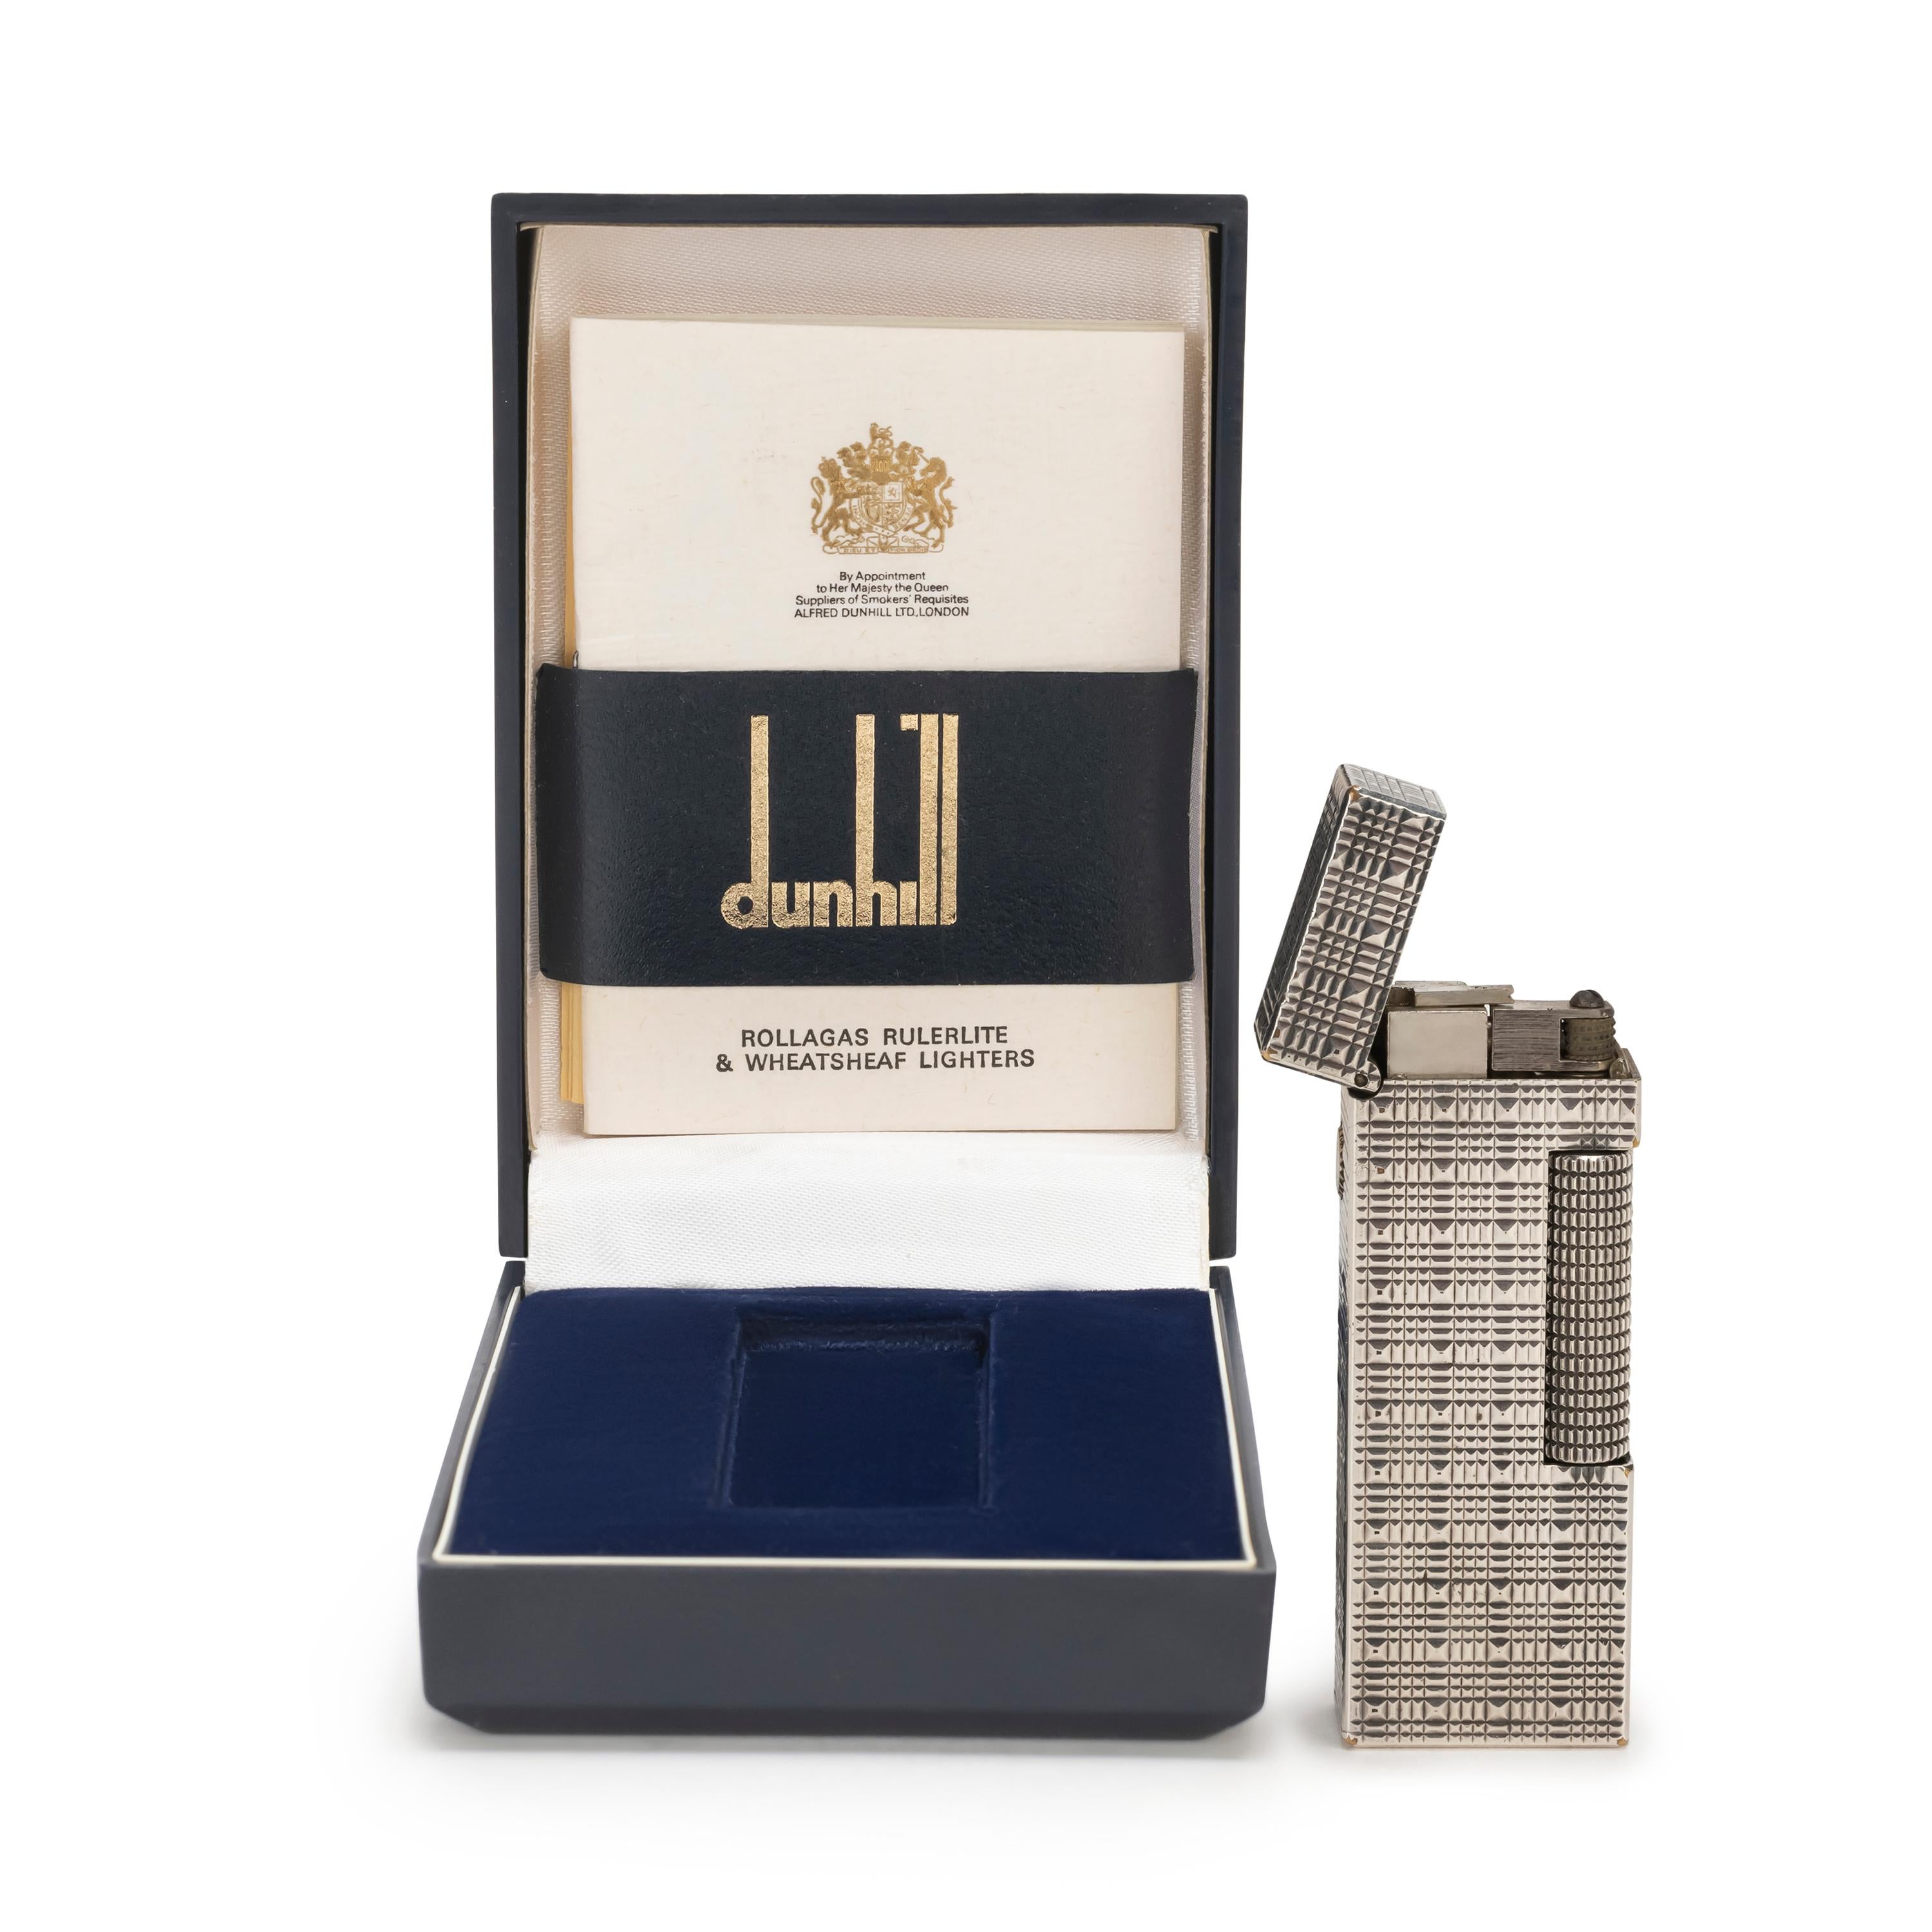 Rare Iconic Vintage and Elegant Dunhill silver Plated Swiss Made Lighter In mint condition.
Works perfectly. 
Iconic and beautifully engineered piece in rare condition.
In original Blue box which is in mint condition, as good as new. 
This lighter